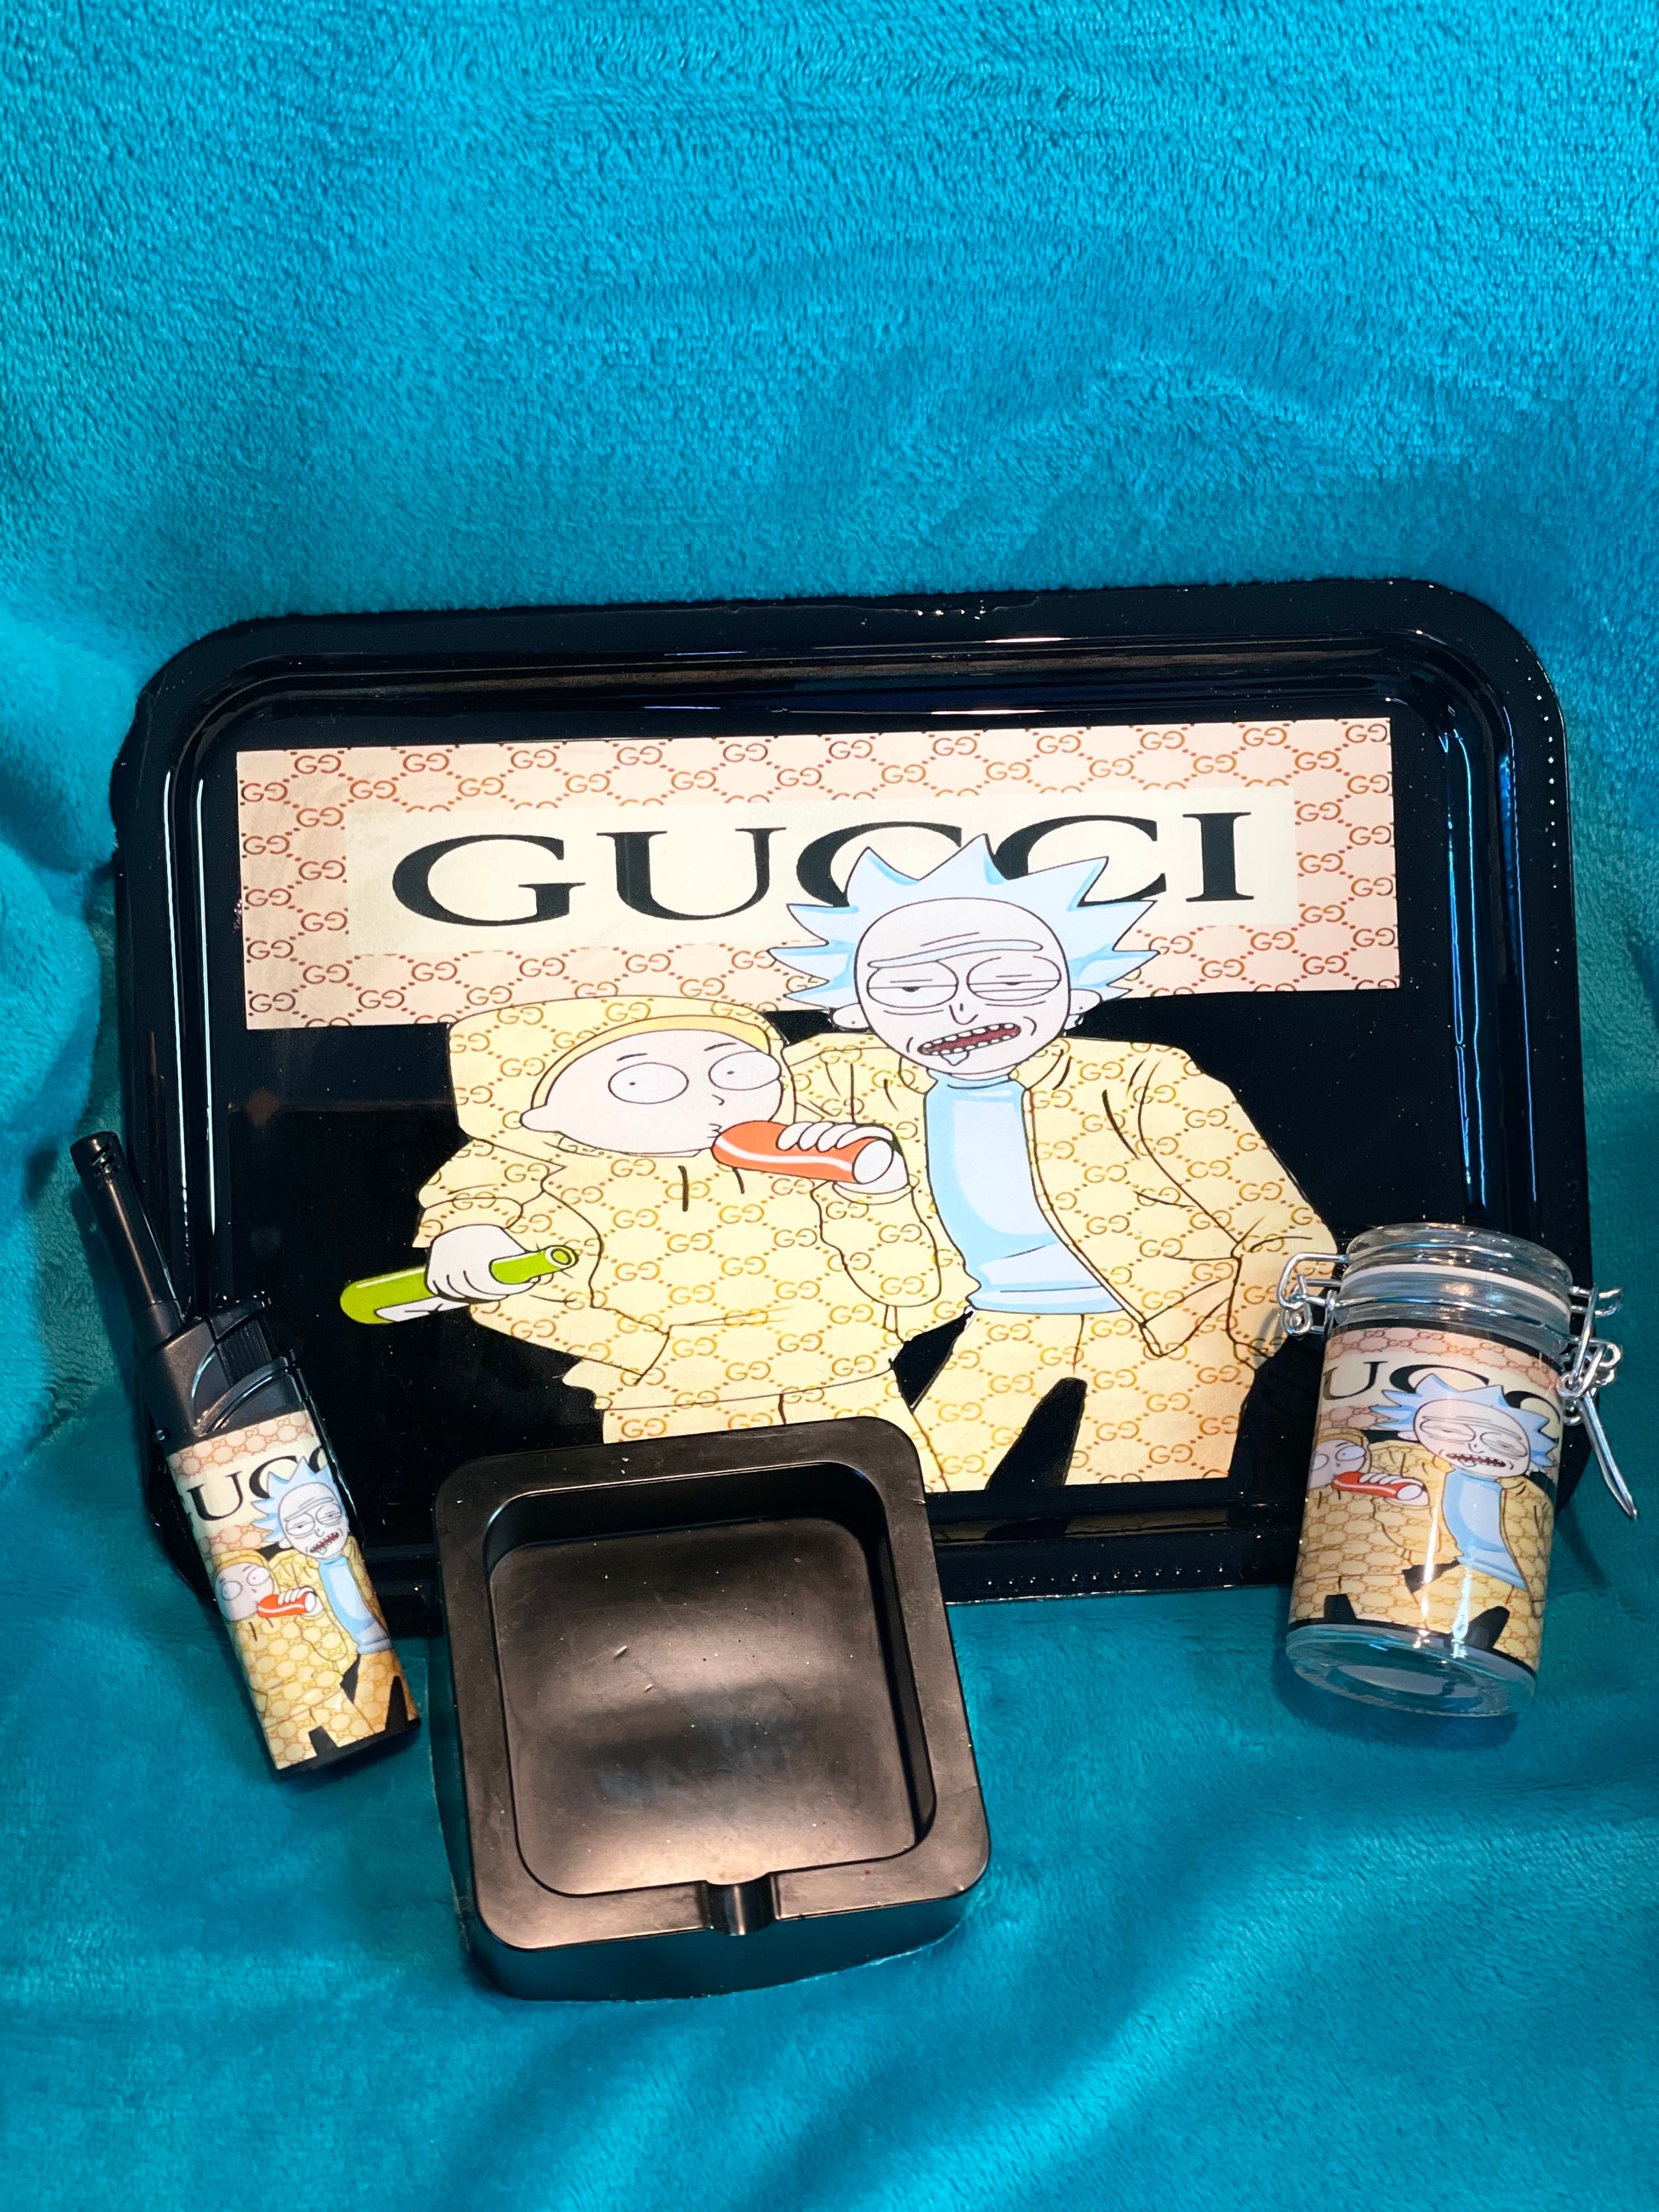 Louis Vuitton Rolling Tray Ashtray and Stash Jar Set. Weed 